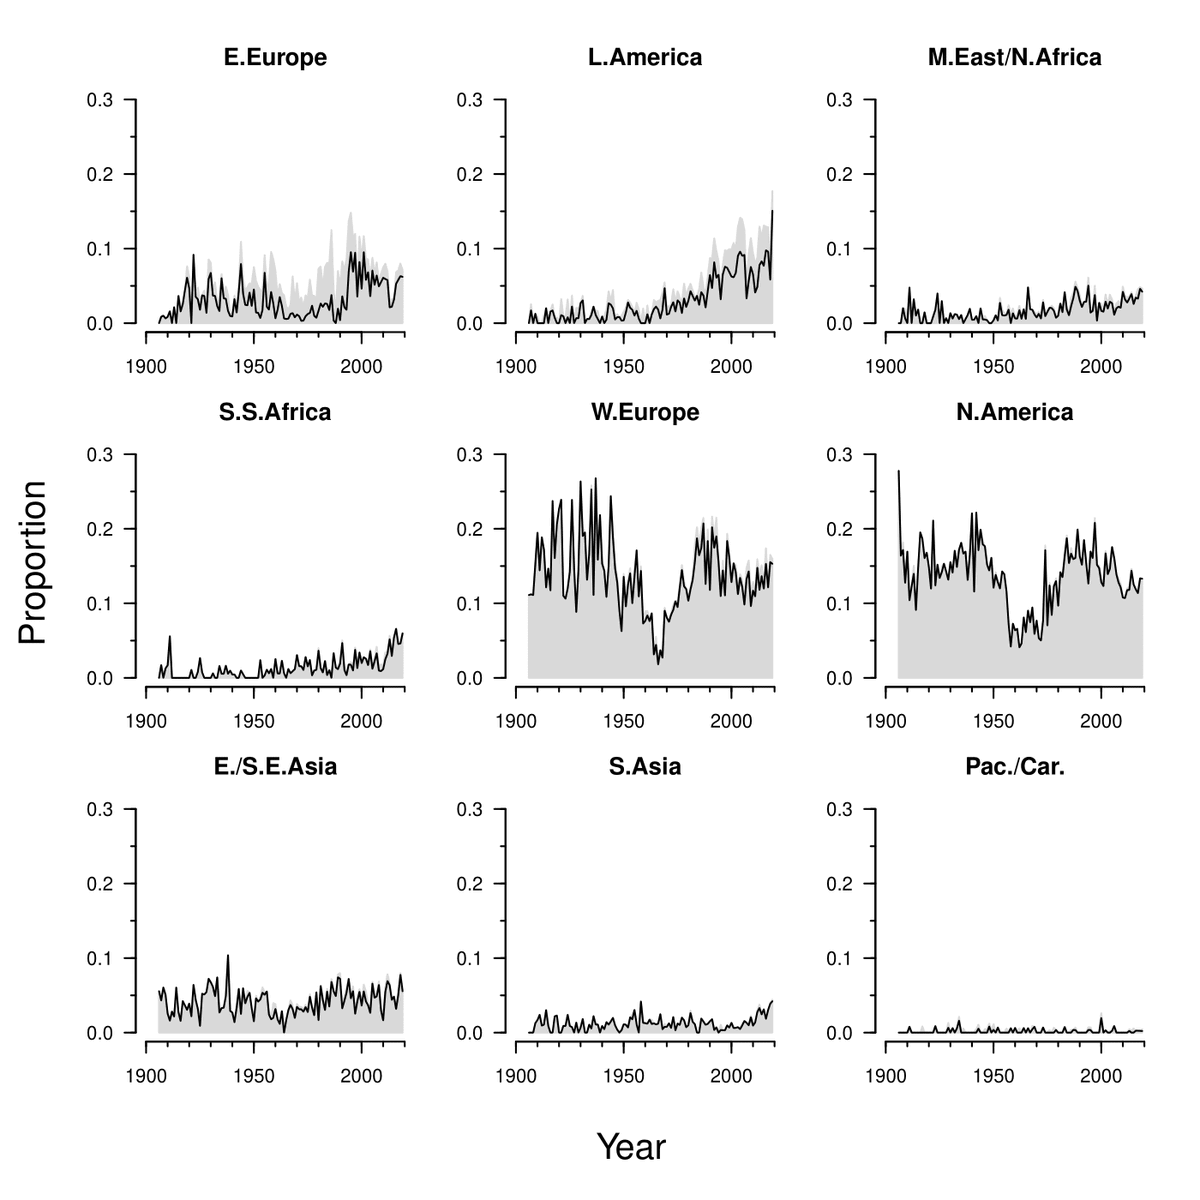 Turns out, also political scientists have been strongly focused on politics in a handful of Western democracies. Even though the discipline is getting more “globalized”, with different regions receiving more attention over the last decades, the Western focus is still strong.